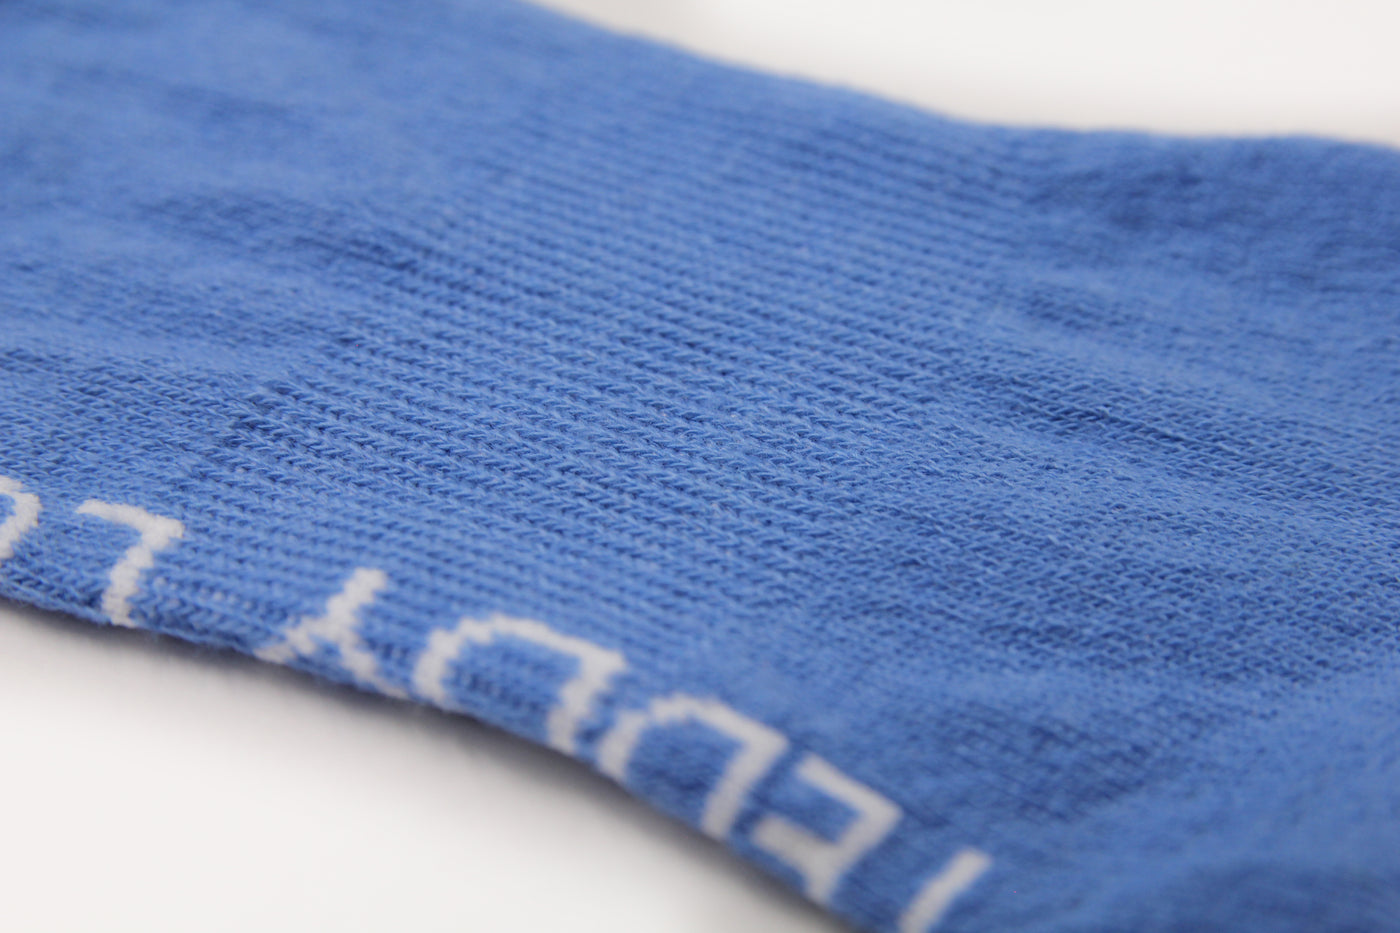 Blue trainer socks with arch support and seamless toes